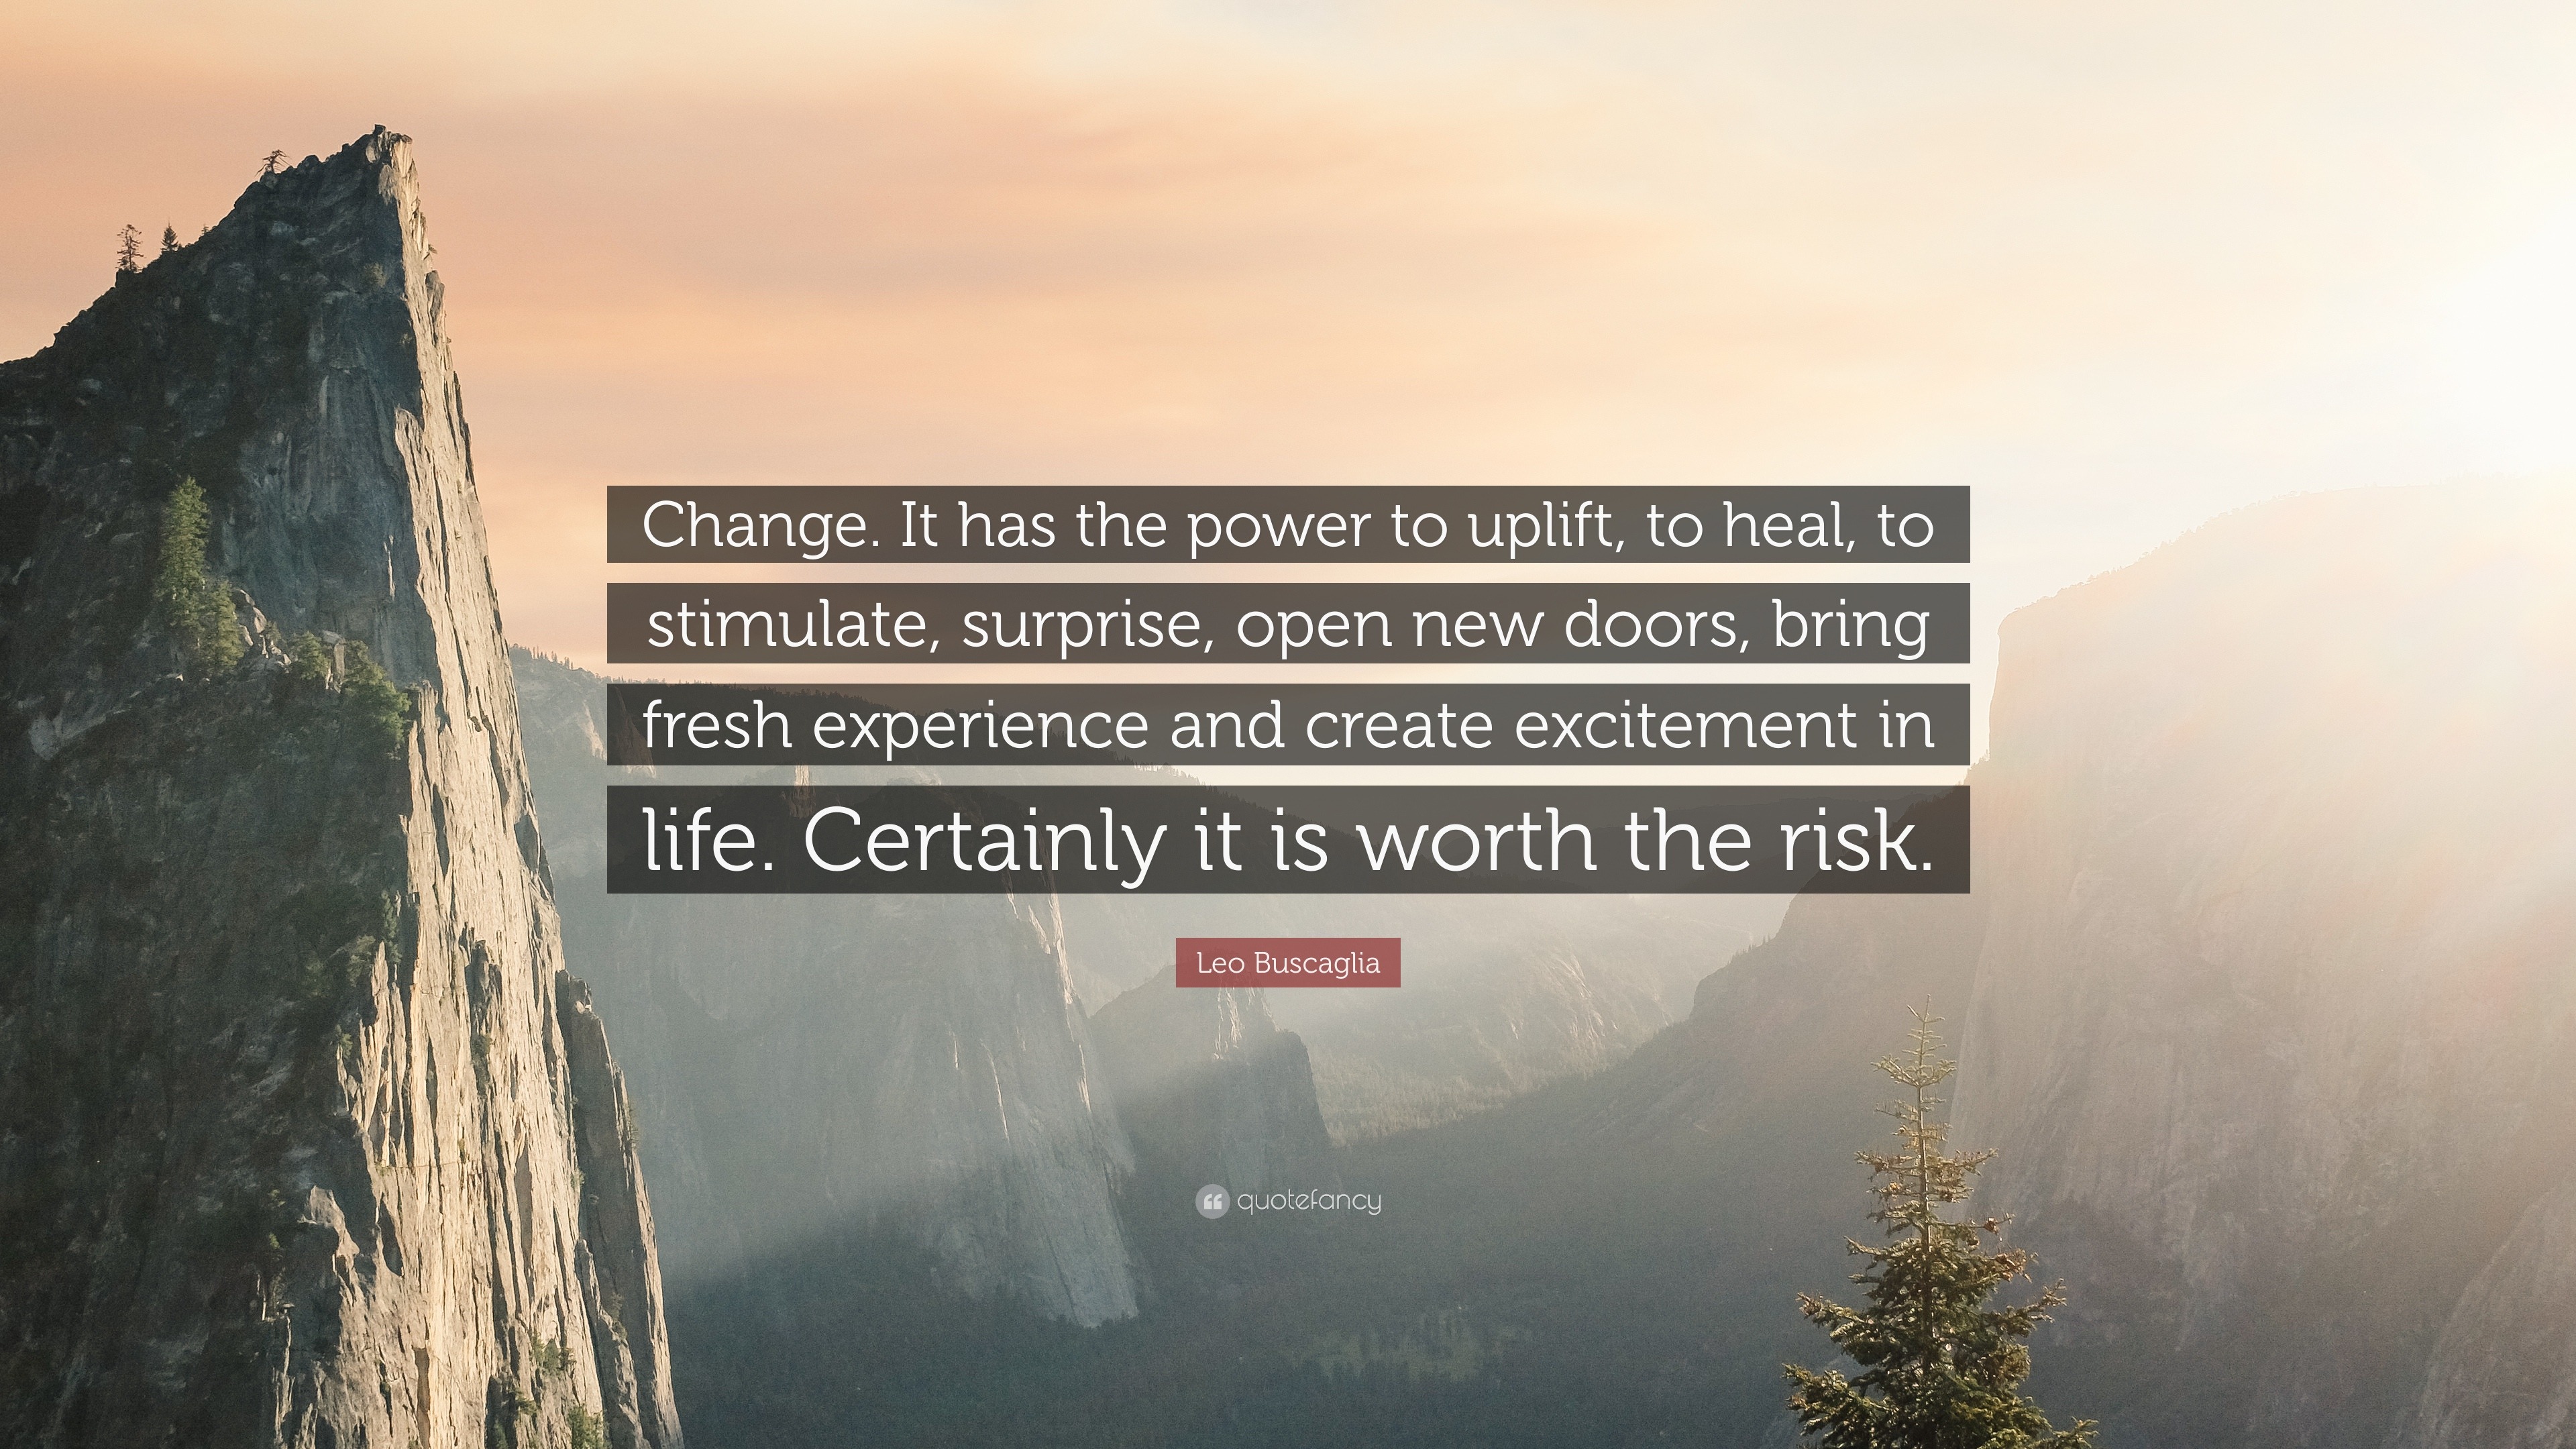 Leo Buscaglia Quote “Change It has the power to uplift to heal